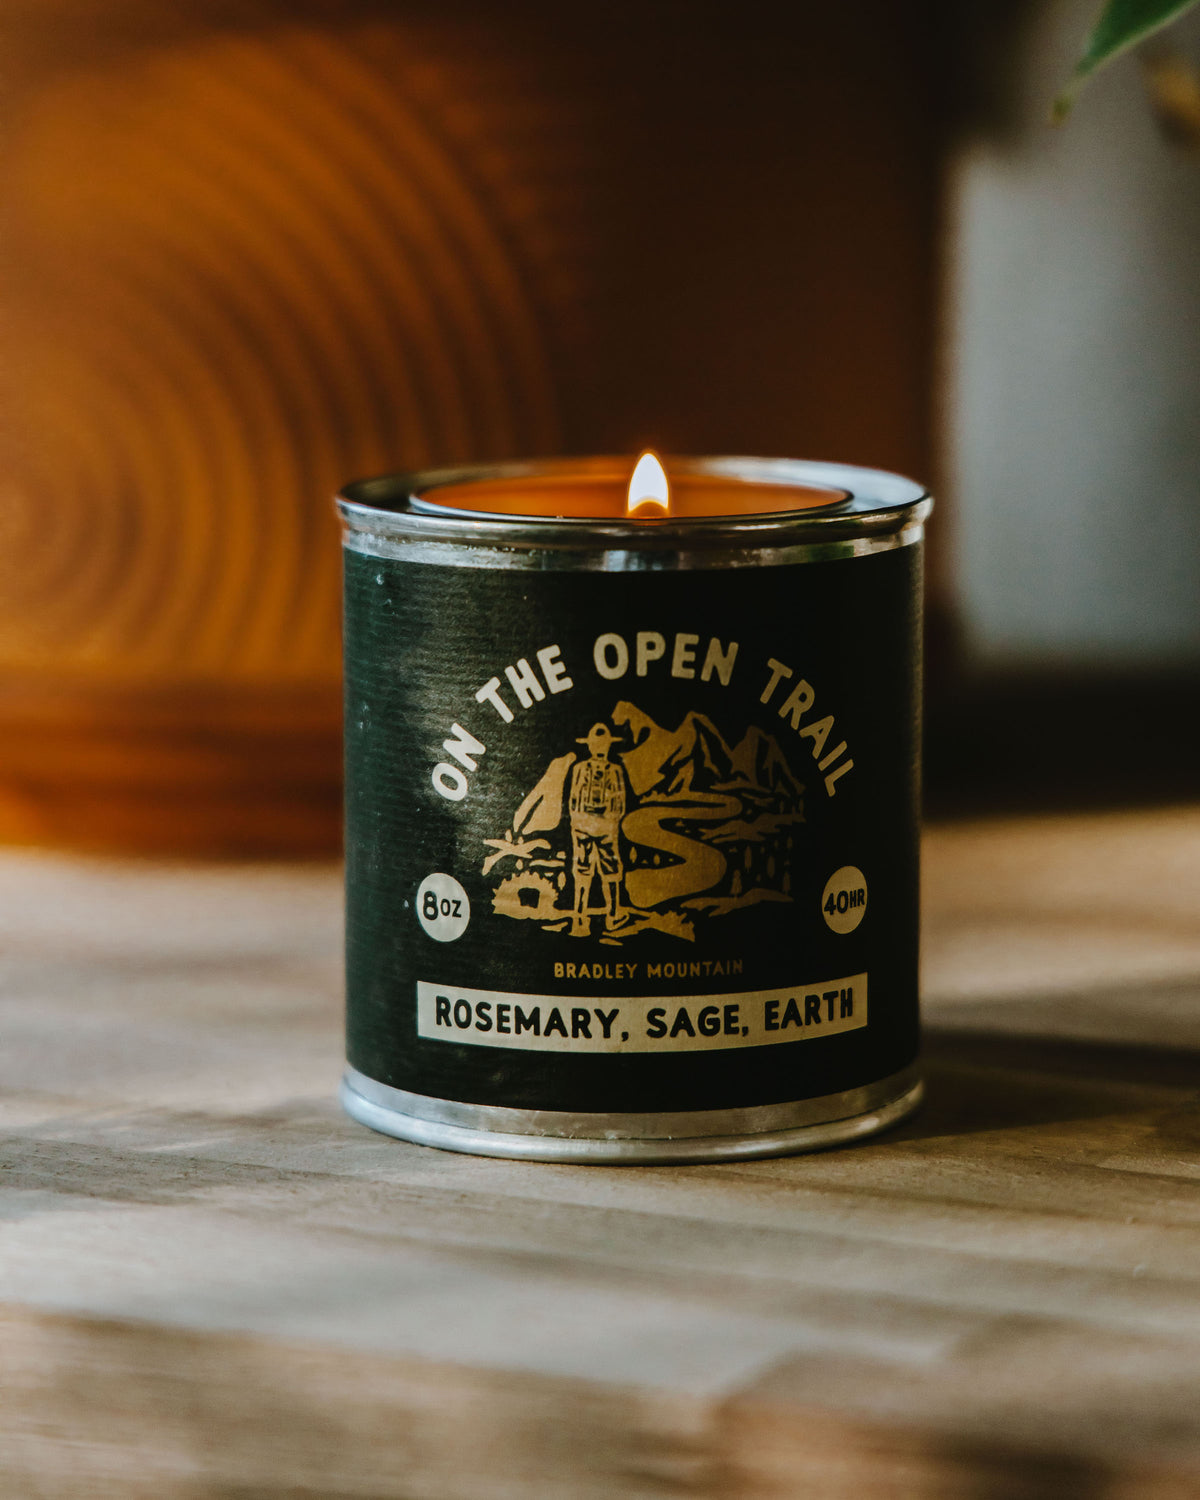 On The Open Trail Travel Candle